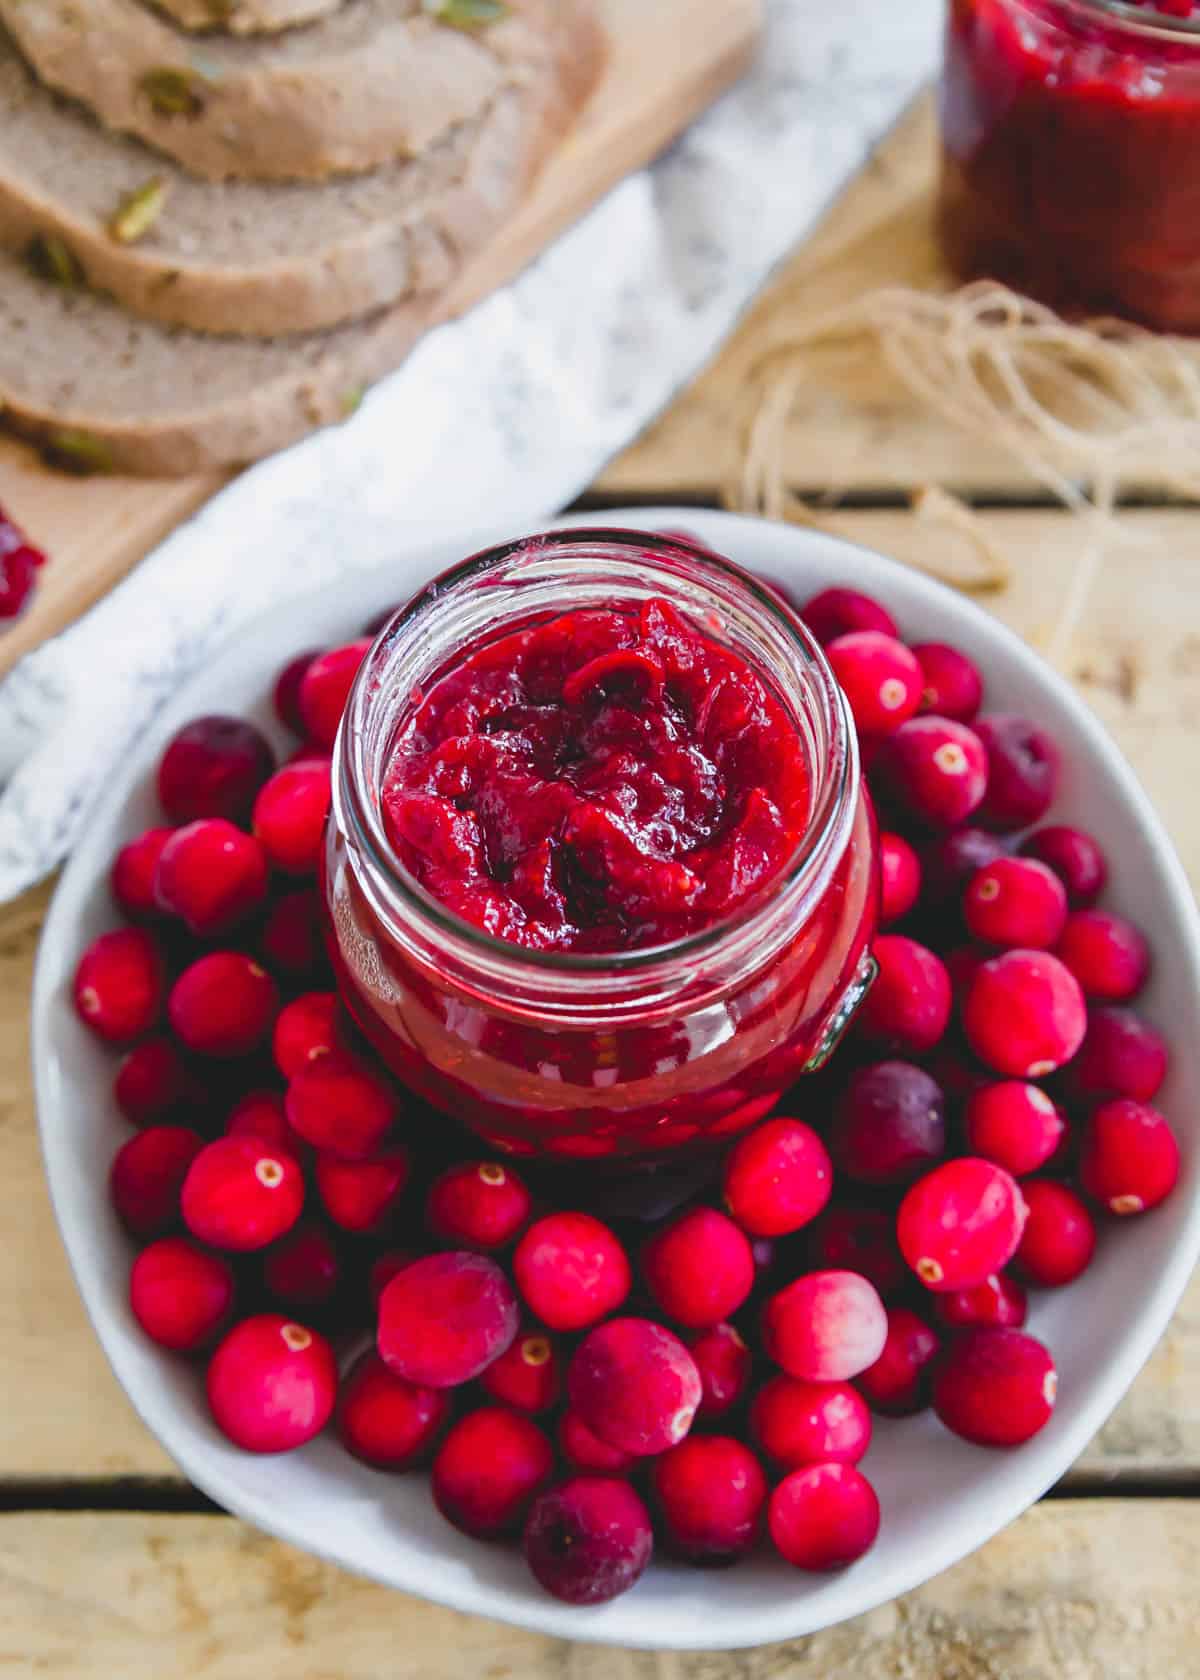 Cranberry jam in a glass jelly jar surrounded by fresh cranberries on a plate.